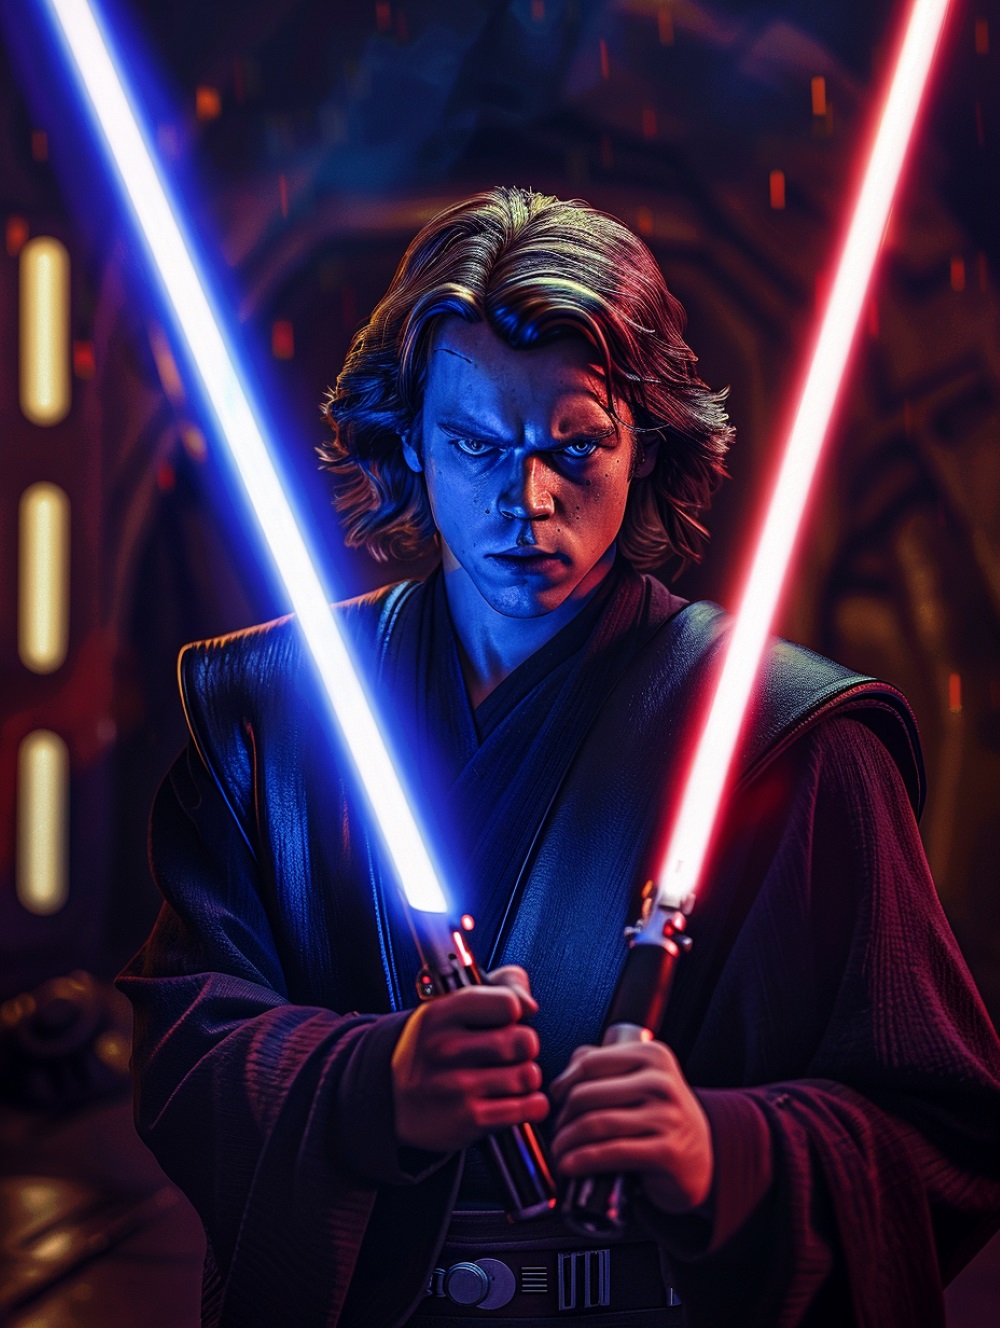 Anakin is holding a blue lightsaber and a red lightsaber